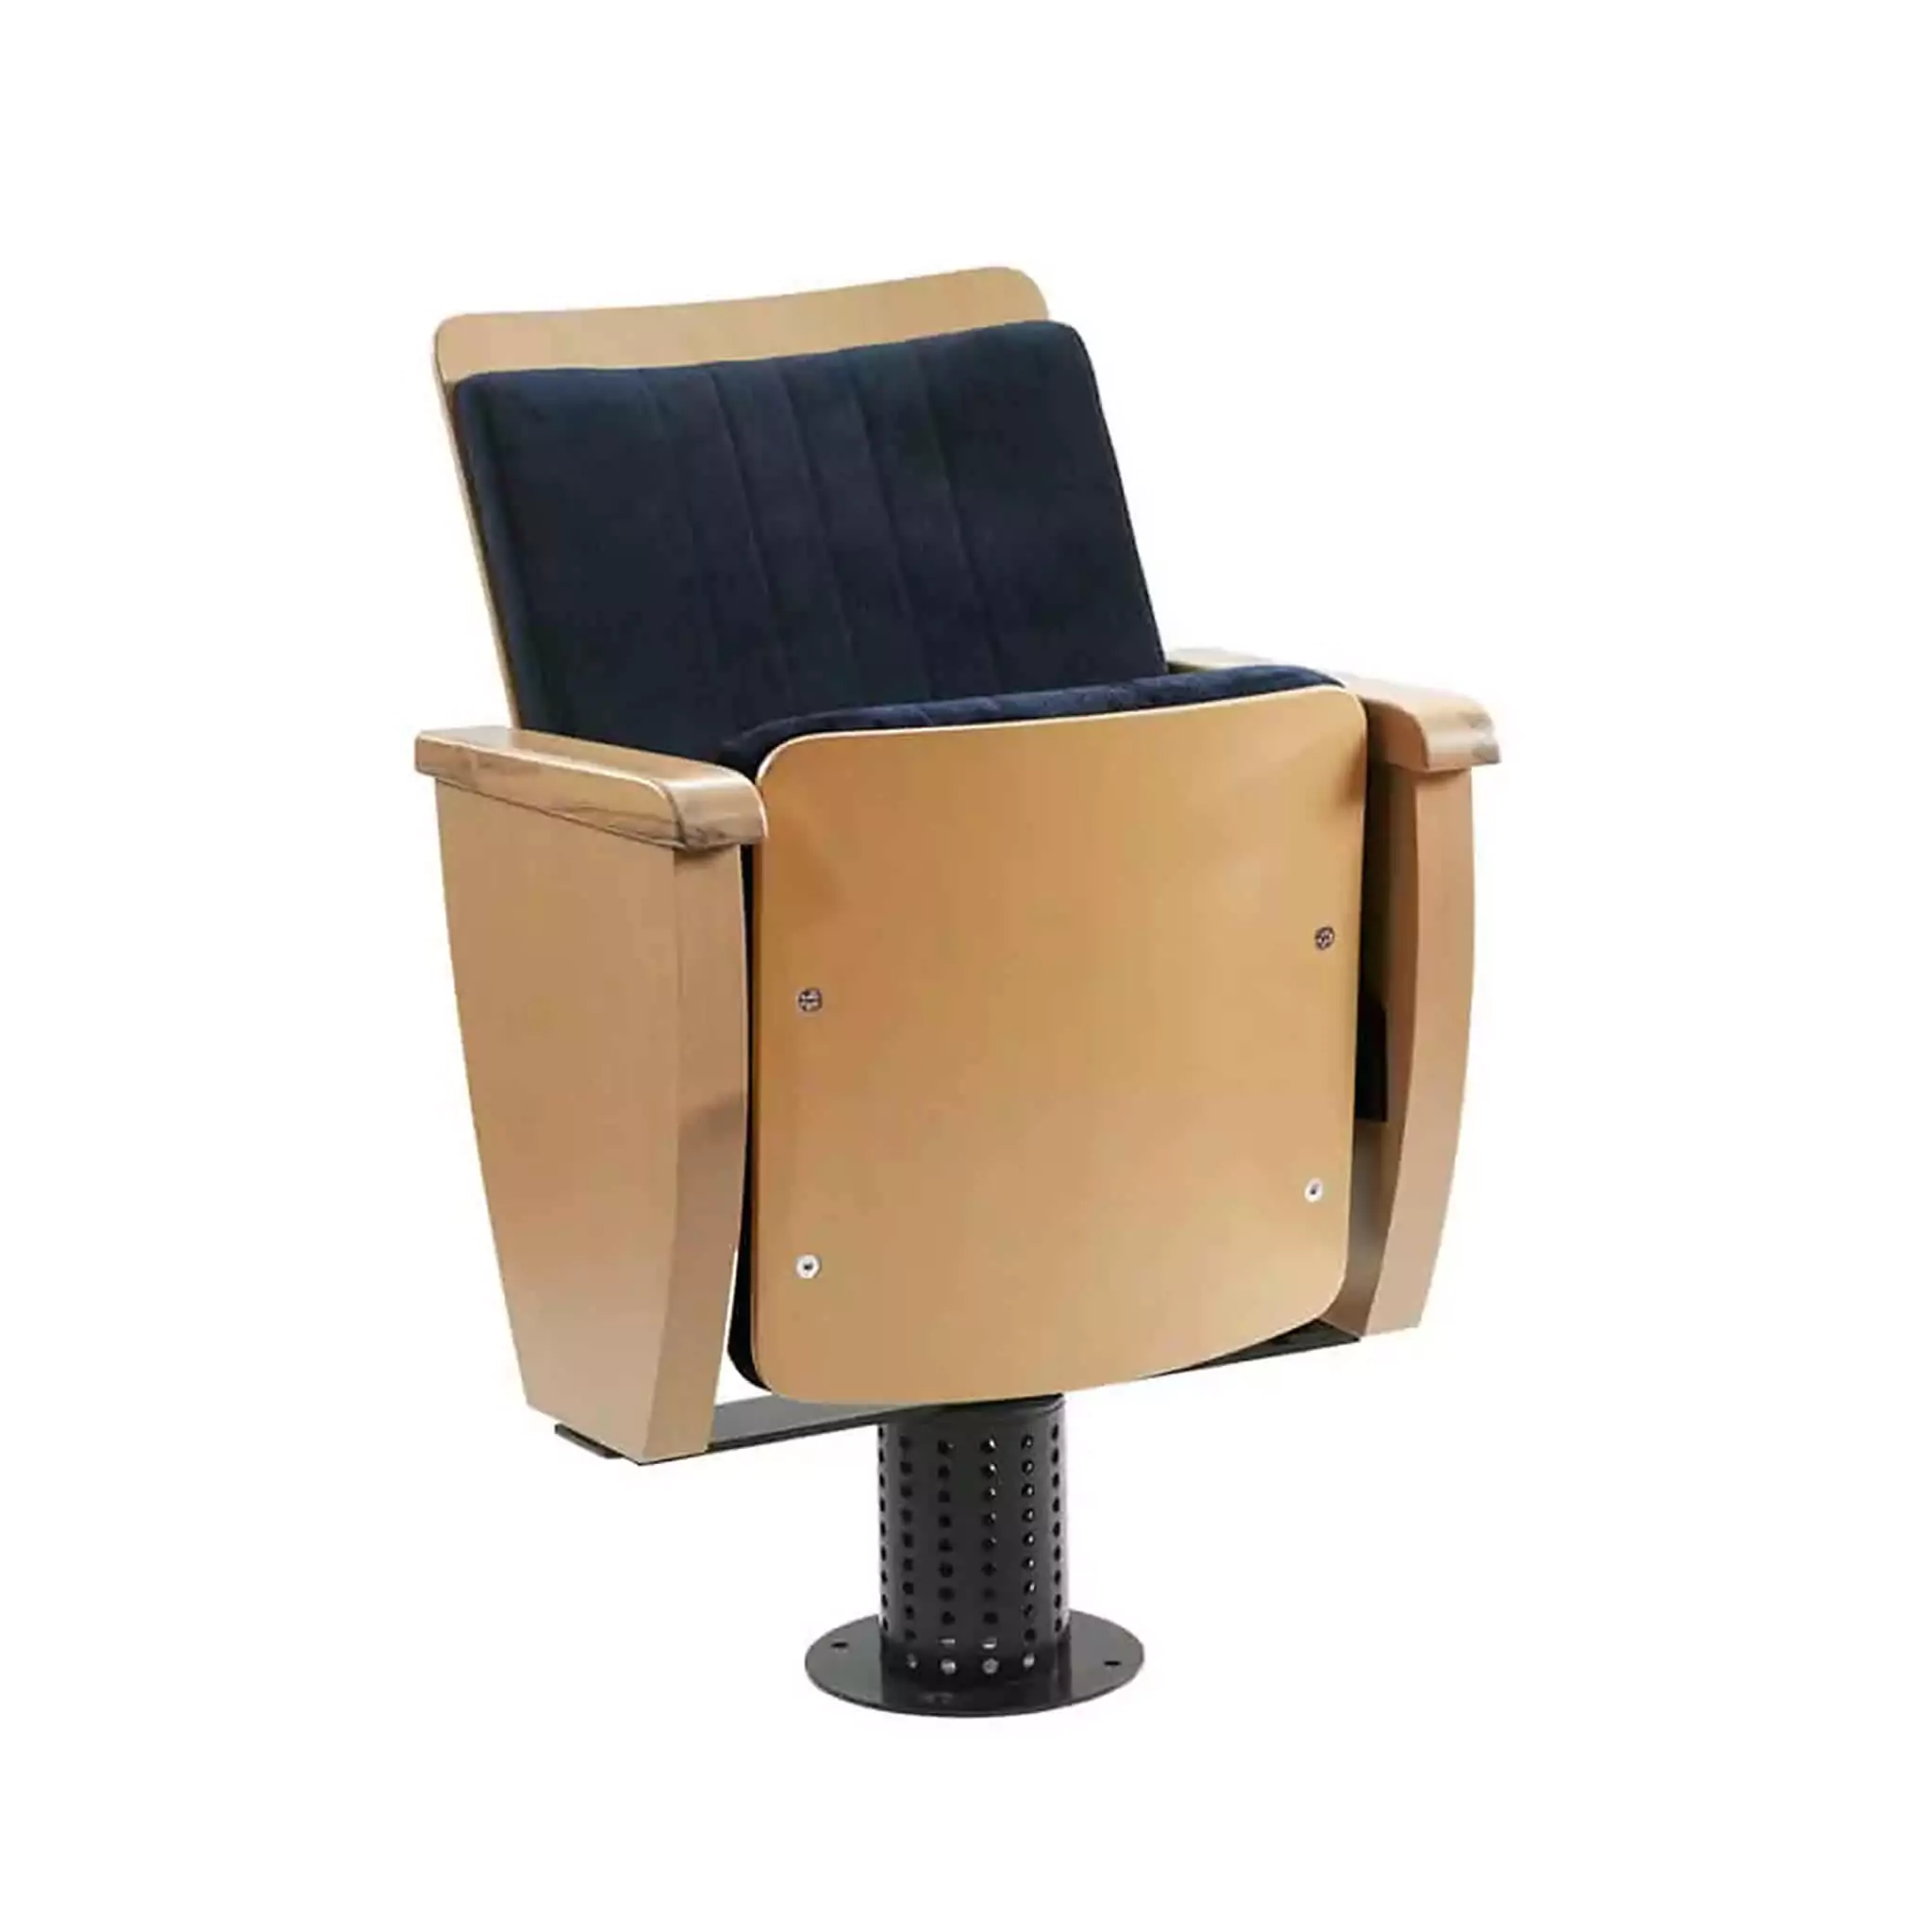 Simko Seating Product Conference Seat Caramel